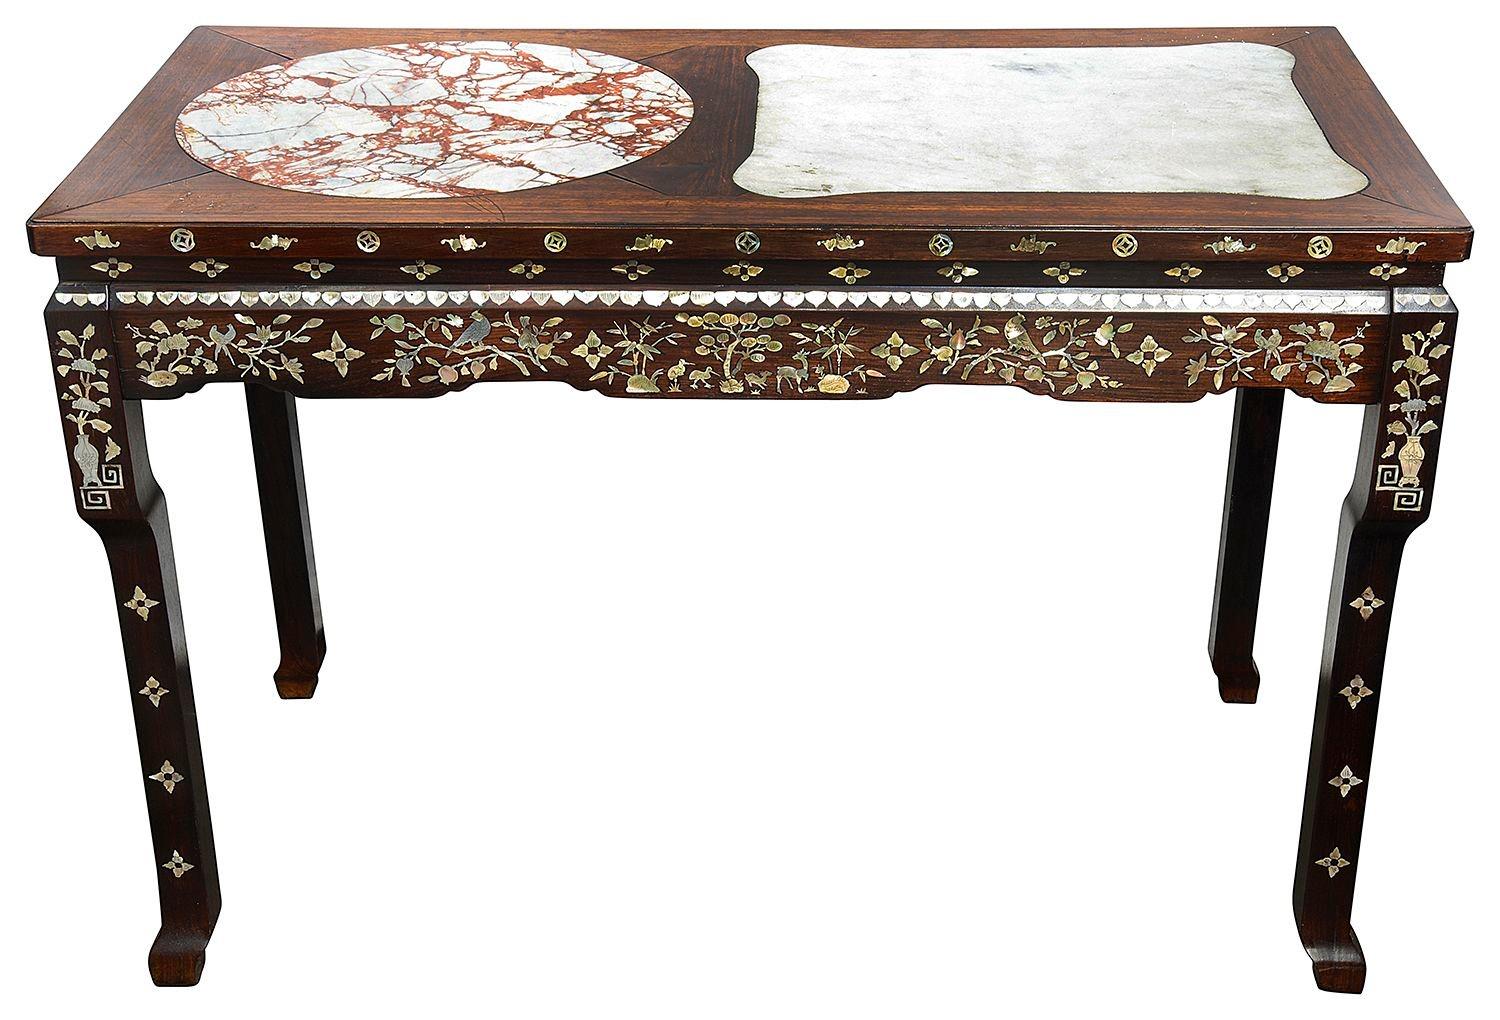 A very good quality late 19th Century Chinese hardwood alter table with inset marble to the top and mother of pearl inlay to the frieze and legs, circa 1890.

Batch 72.